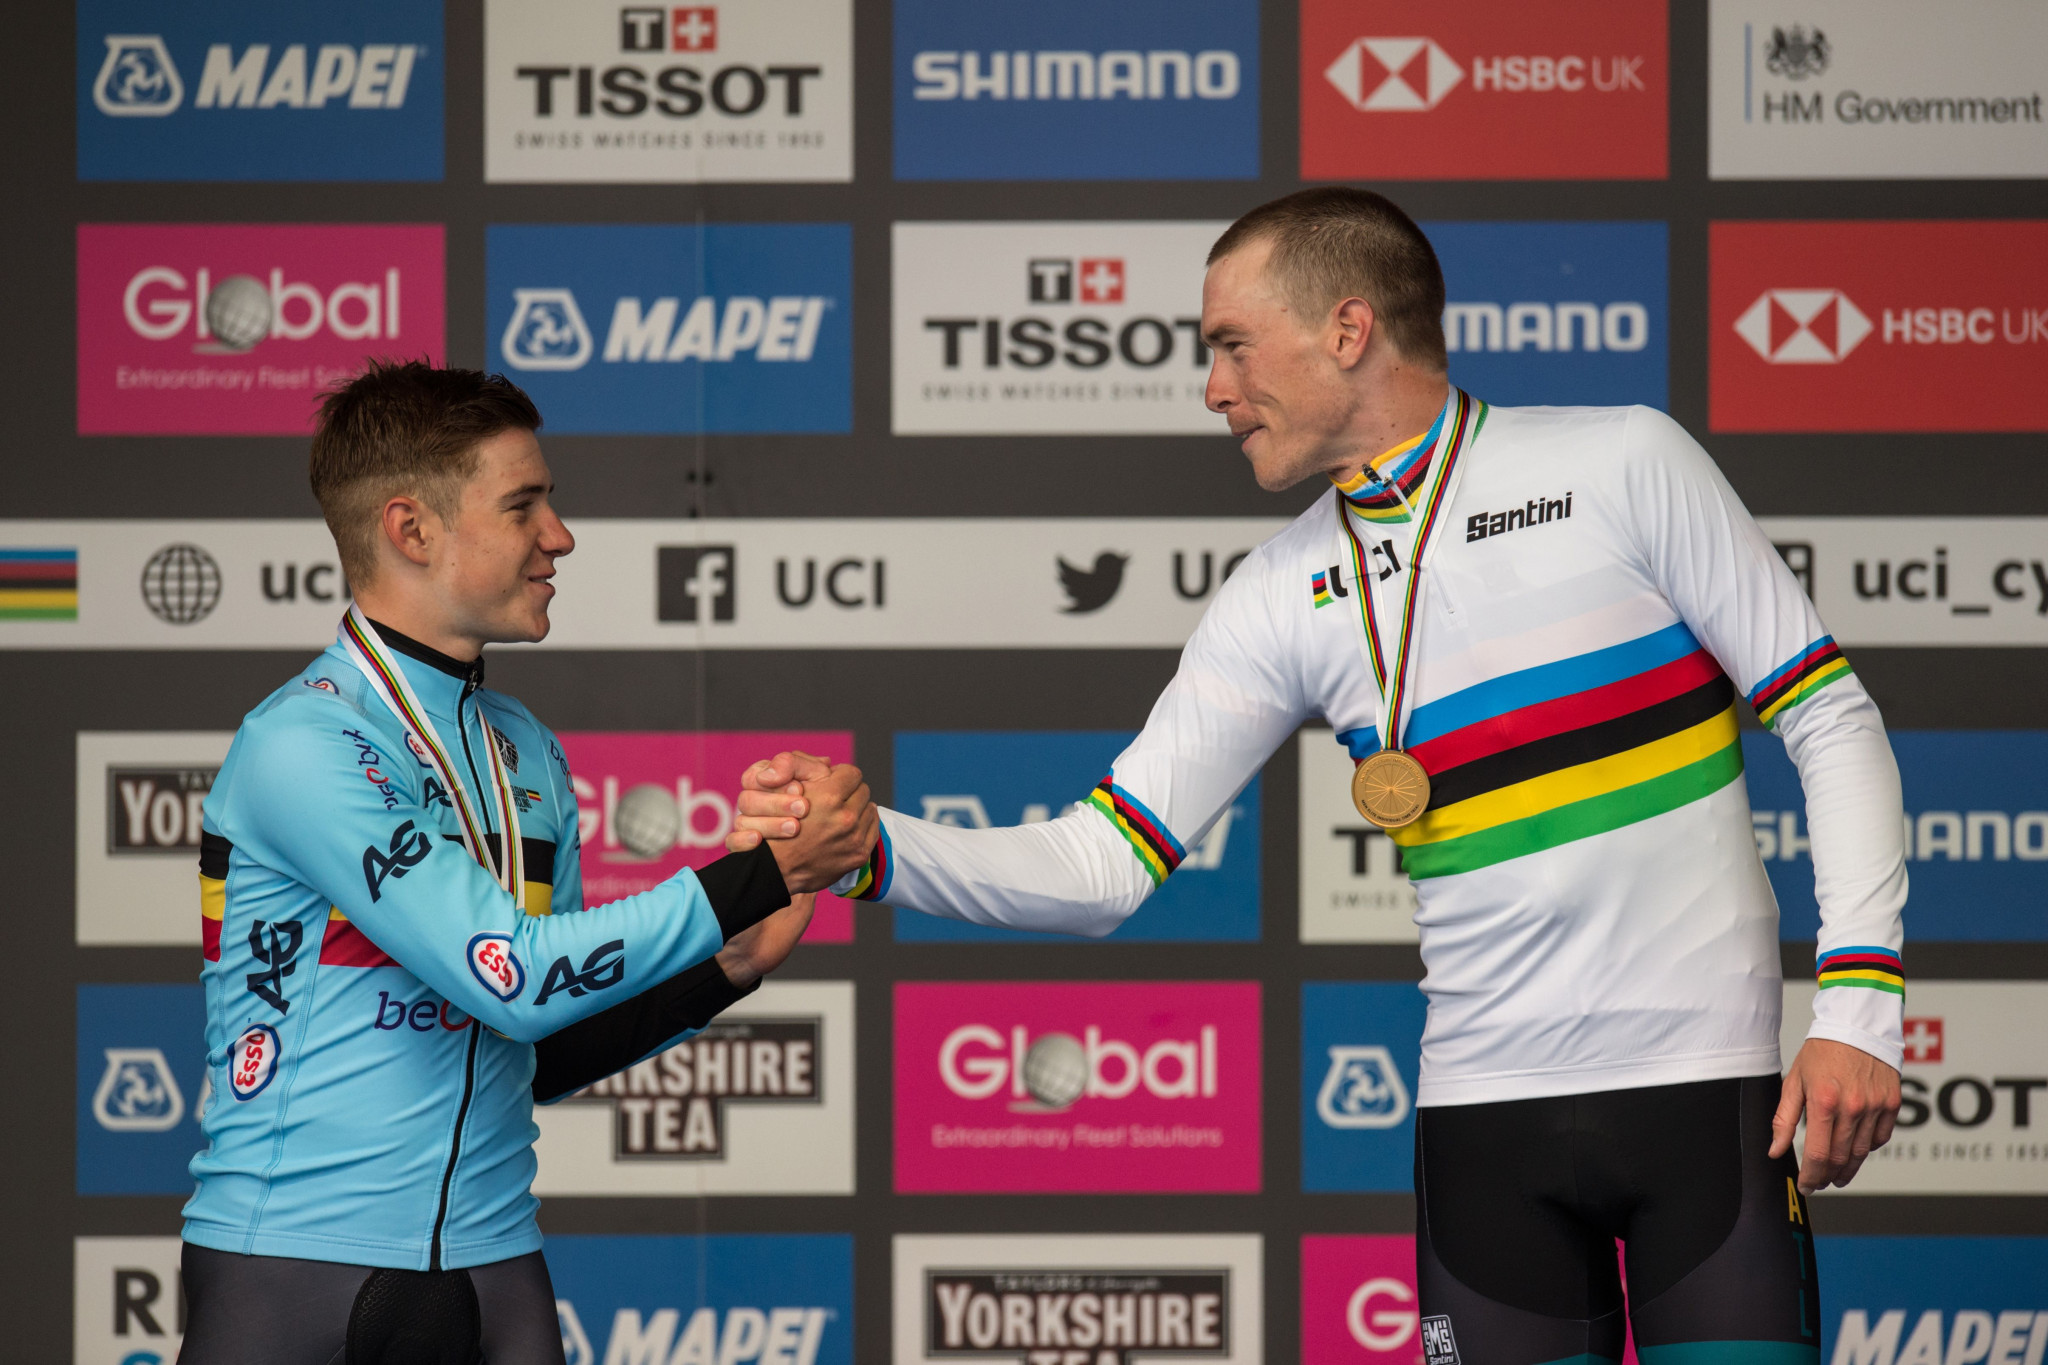 Belgium's teenager Remco Evenepoel finished as the runner-up to Rohan Dennis ©Getty Images